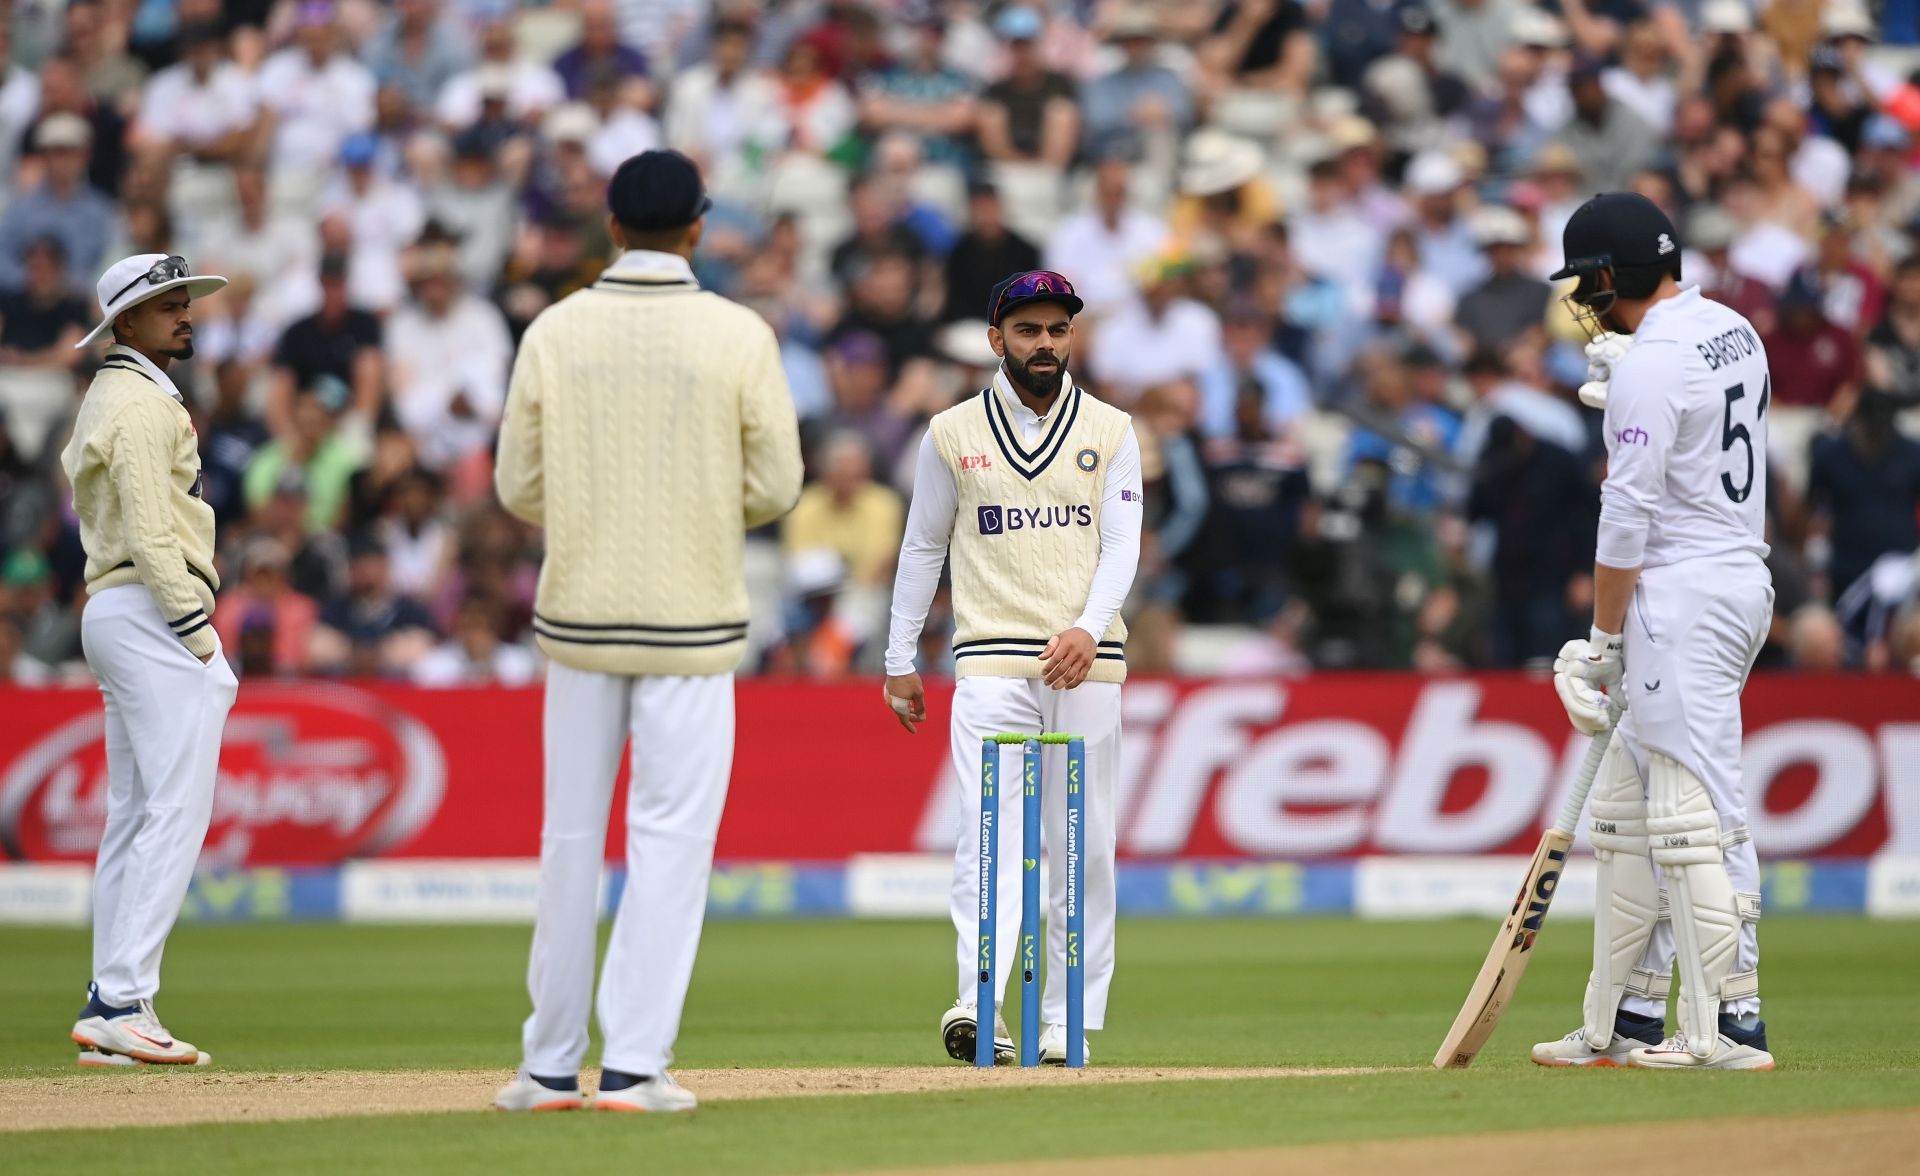 Virat Kohli and Jonny Bairstow exchanged words on Day 3 of the fifth Test. (Credits: Getty)